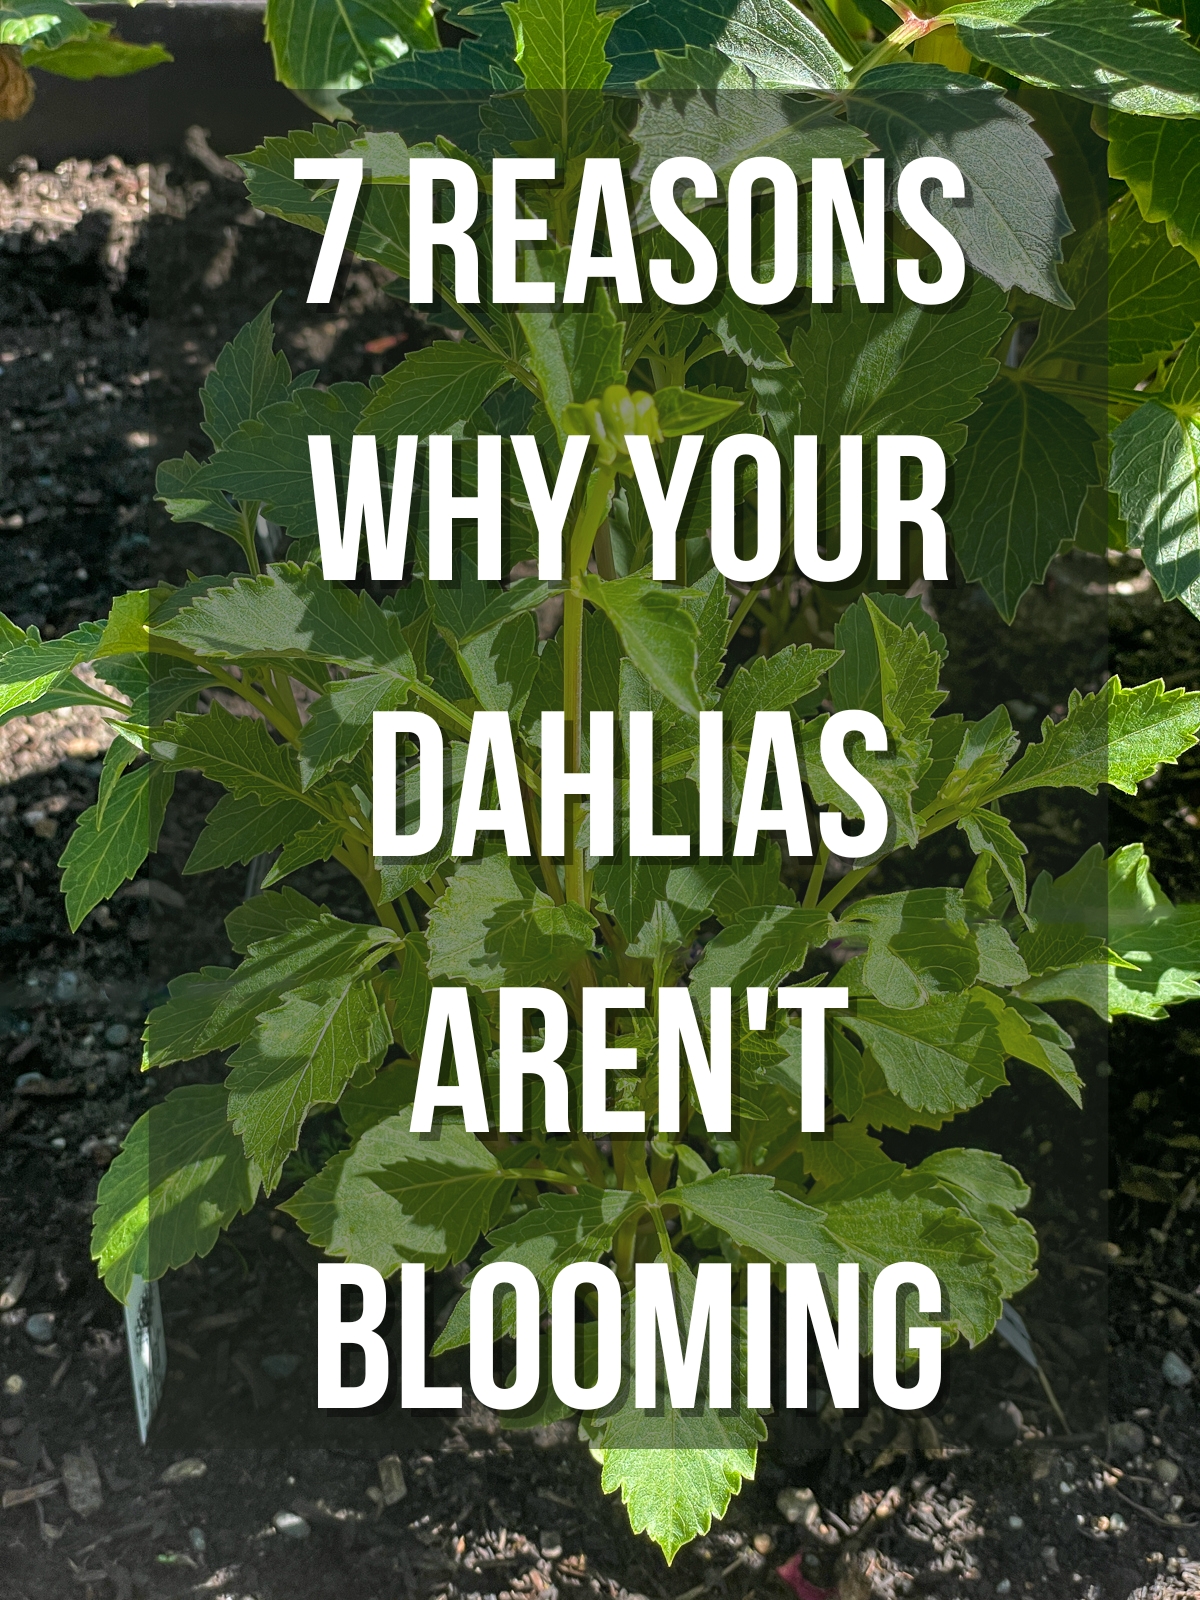 7 reasons why your dahlias aren't blooming text overlay